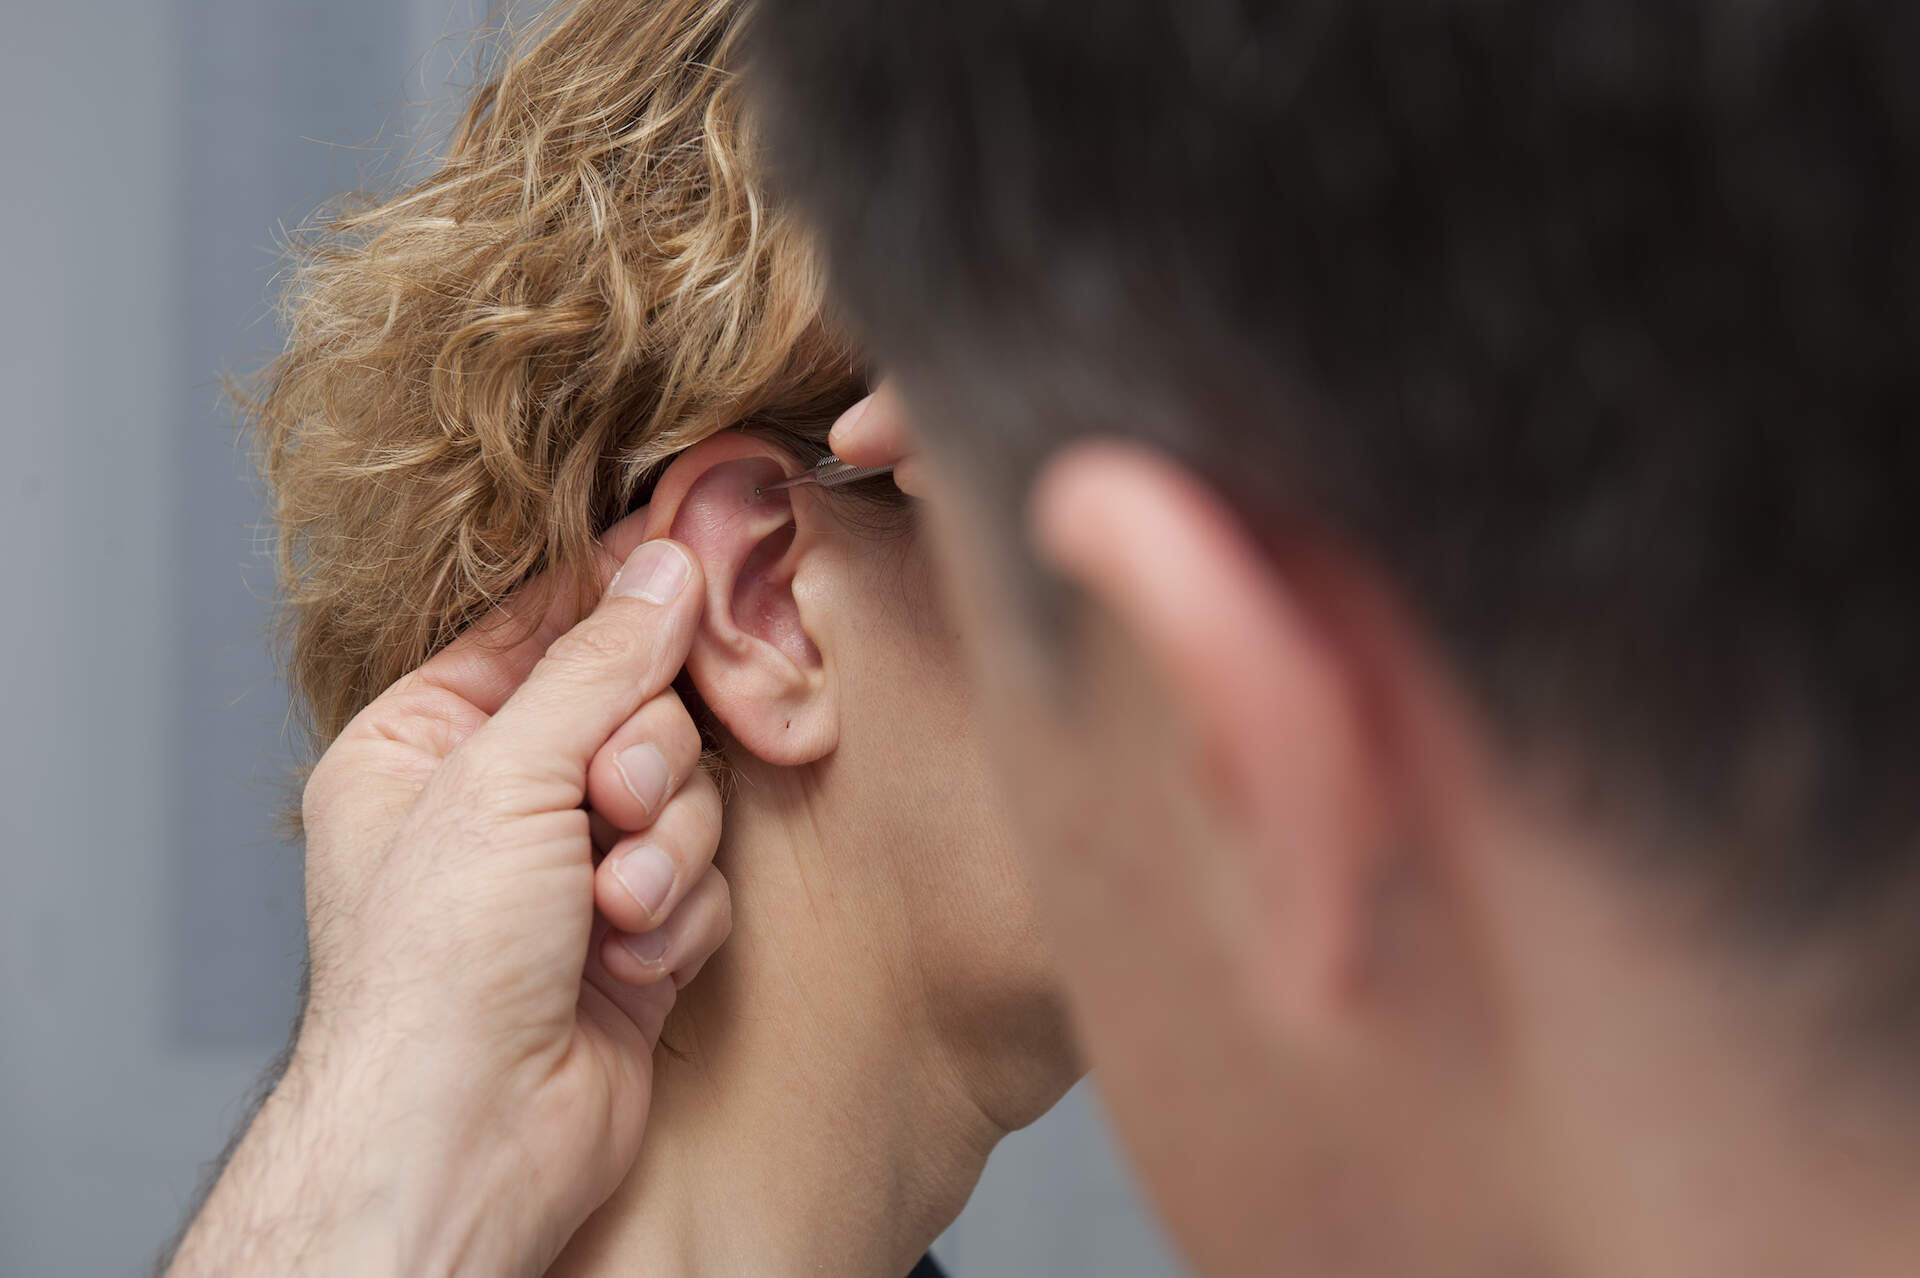 Ear Reflex Zone Therapy - holistic treatment in the smallest space